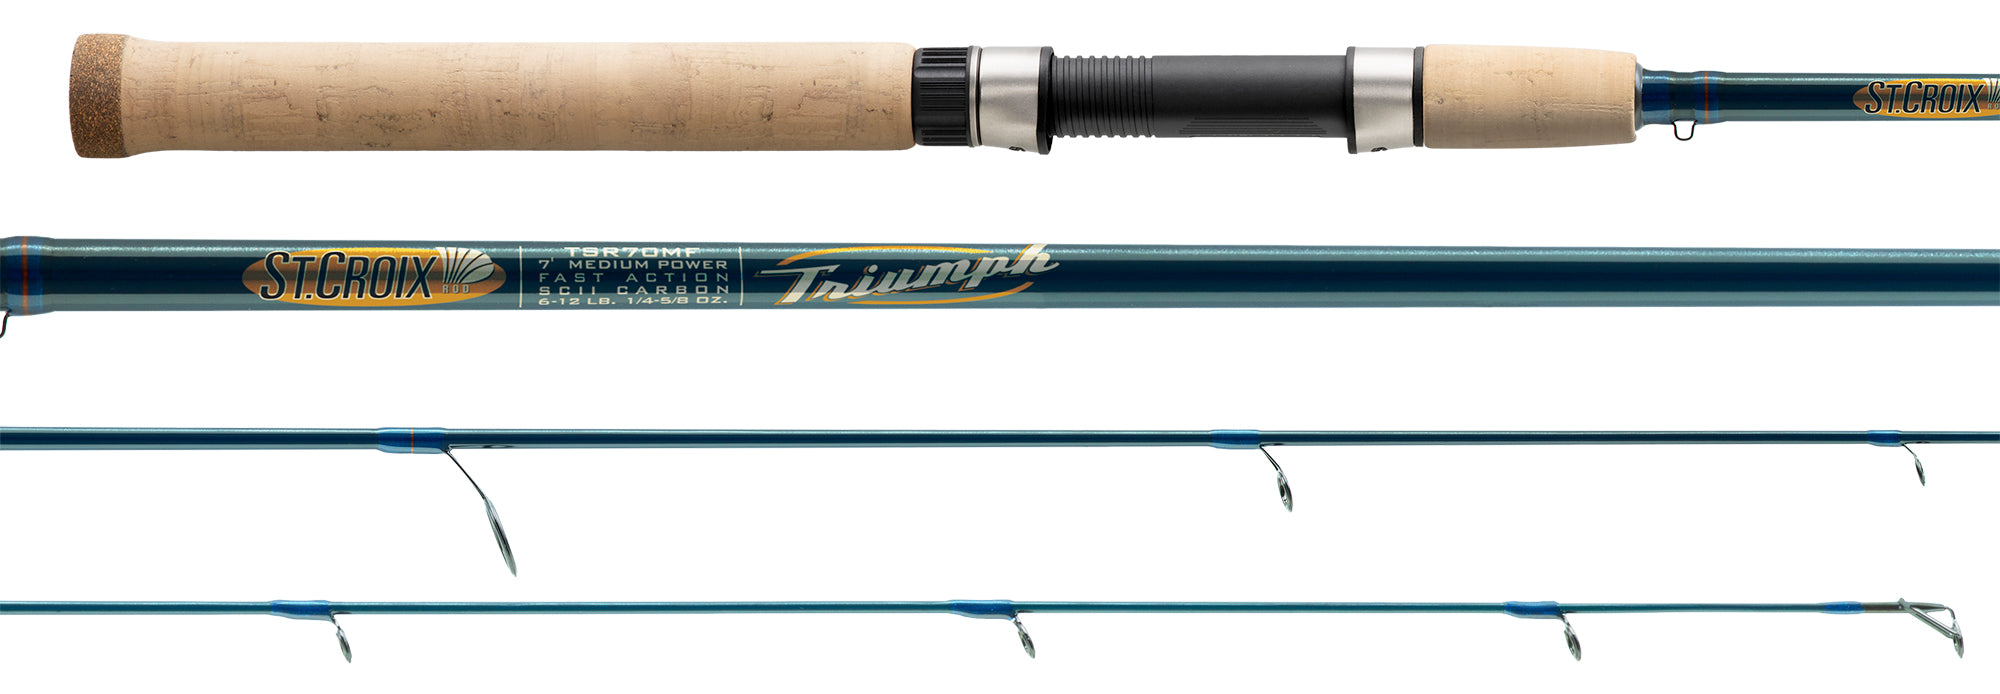 https://ptboprotackle.ca/cdn/shop/products/st-croix-tsr76mhf-triumph-spinning-rod-1.jpg?v=1632248509&width=2000